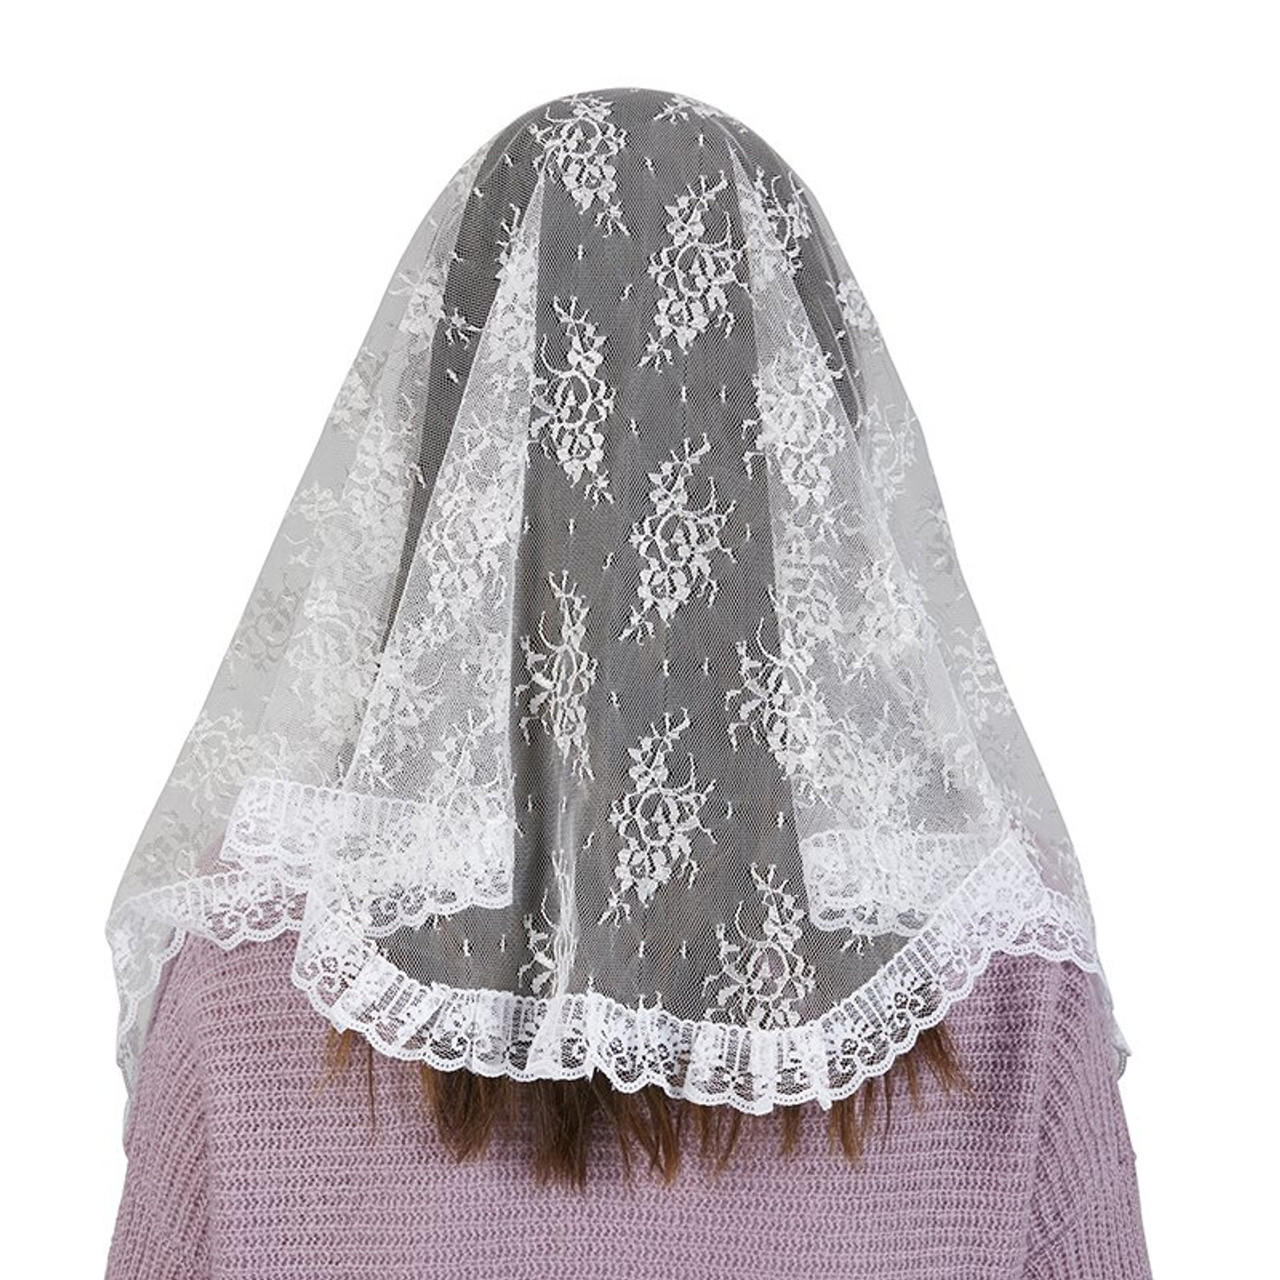 Needzo Long Chapel Veils for Church, Two Tone Ivory Veil for Catholic Mass,  Traditional Lace Head Coverings for Women, 24 Inches